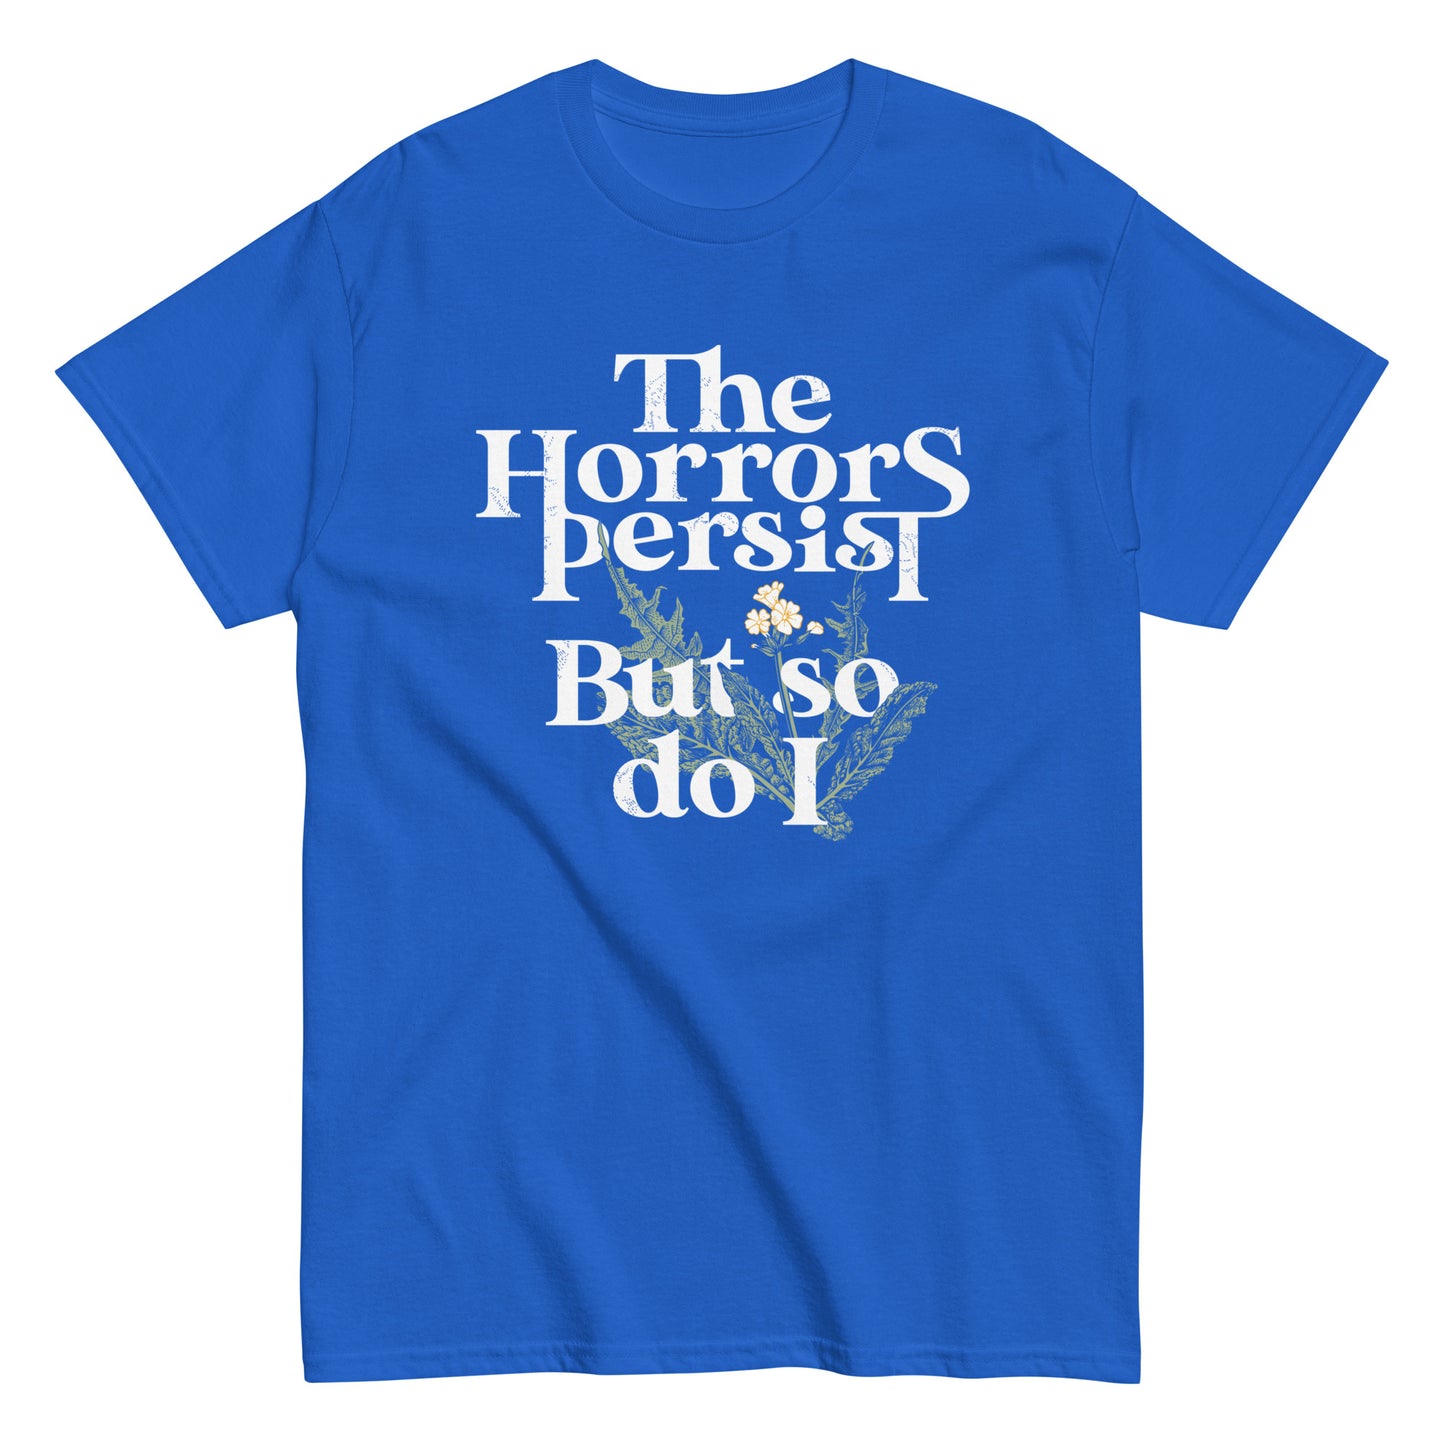 The Horrors Persist But So Do I Men's Classic Tee